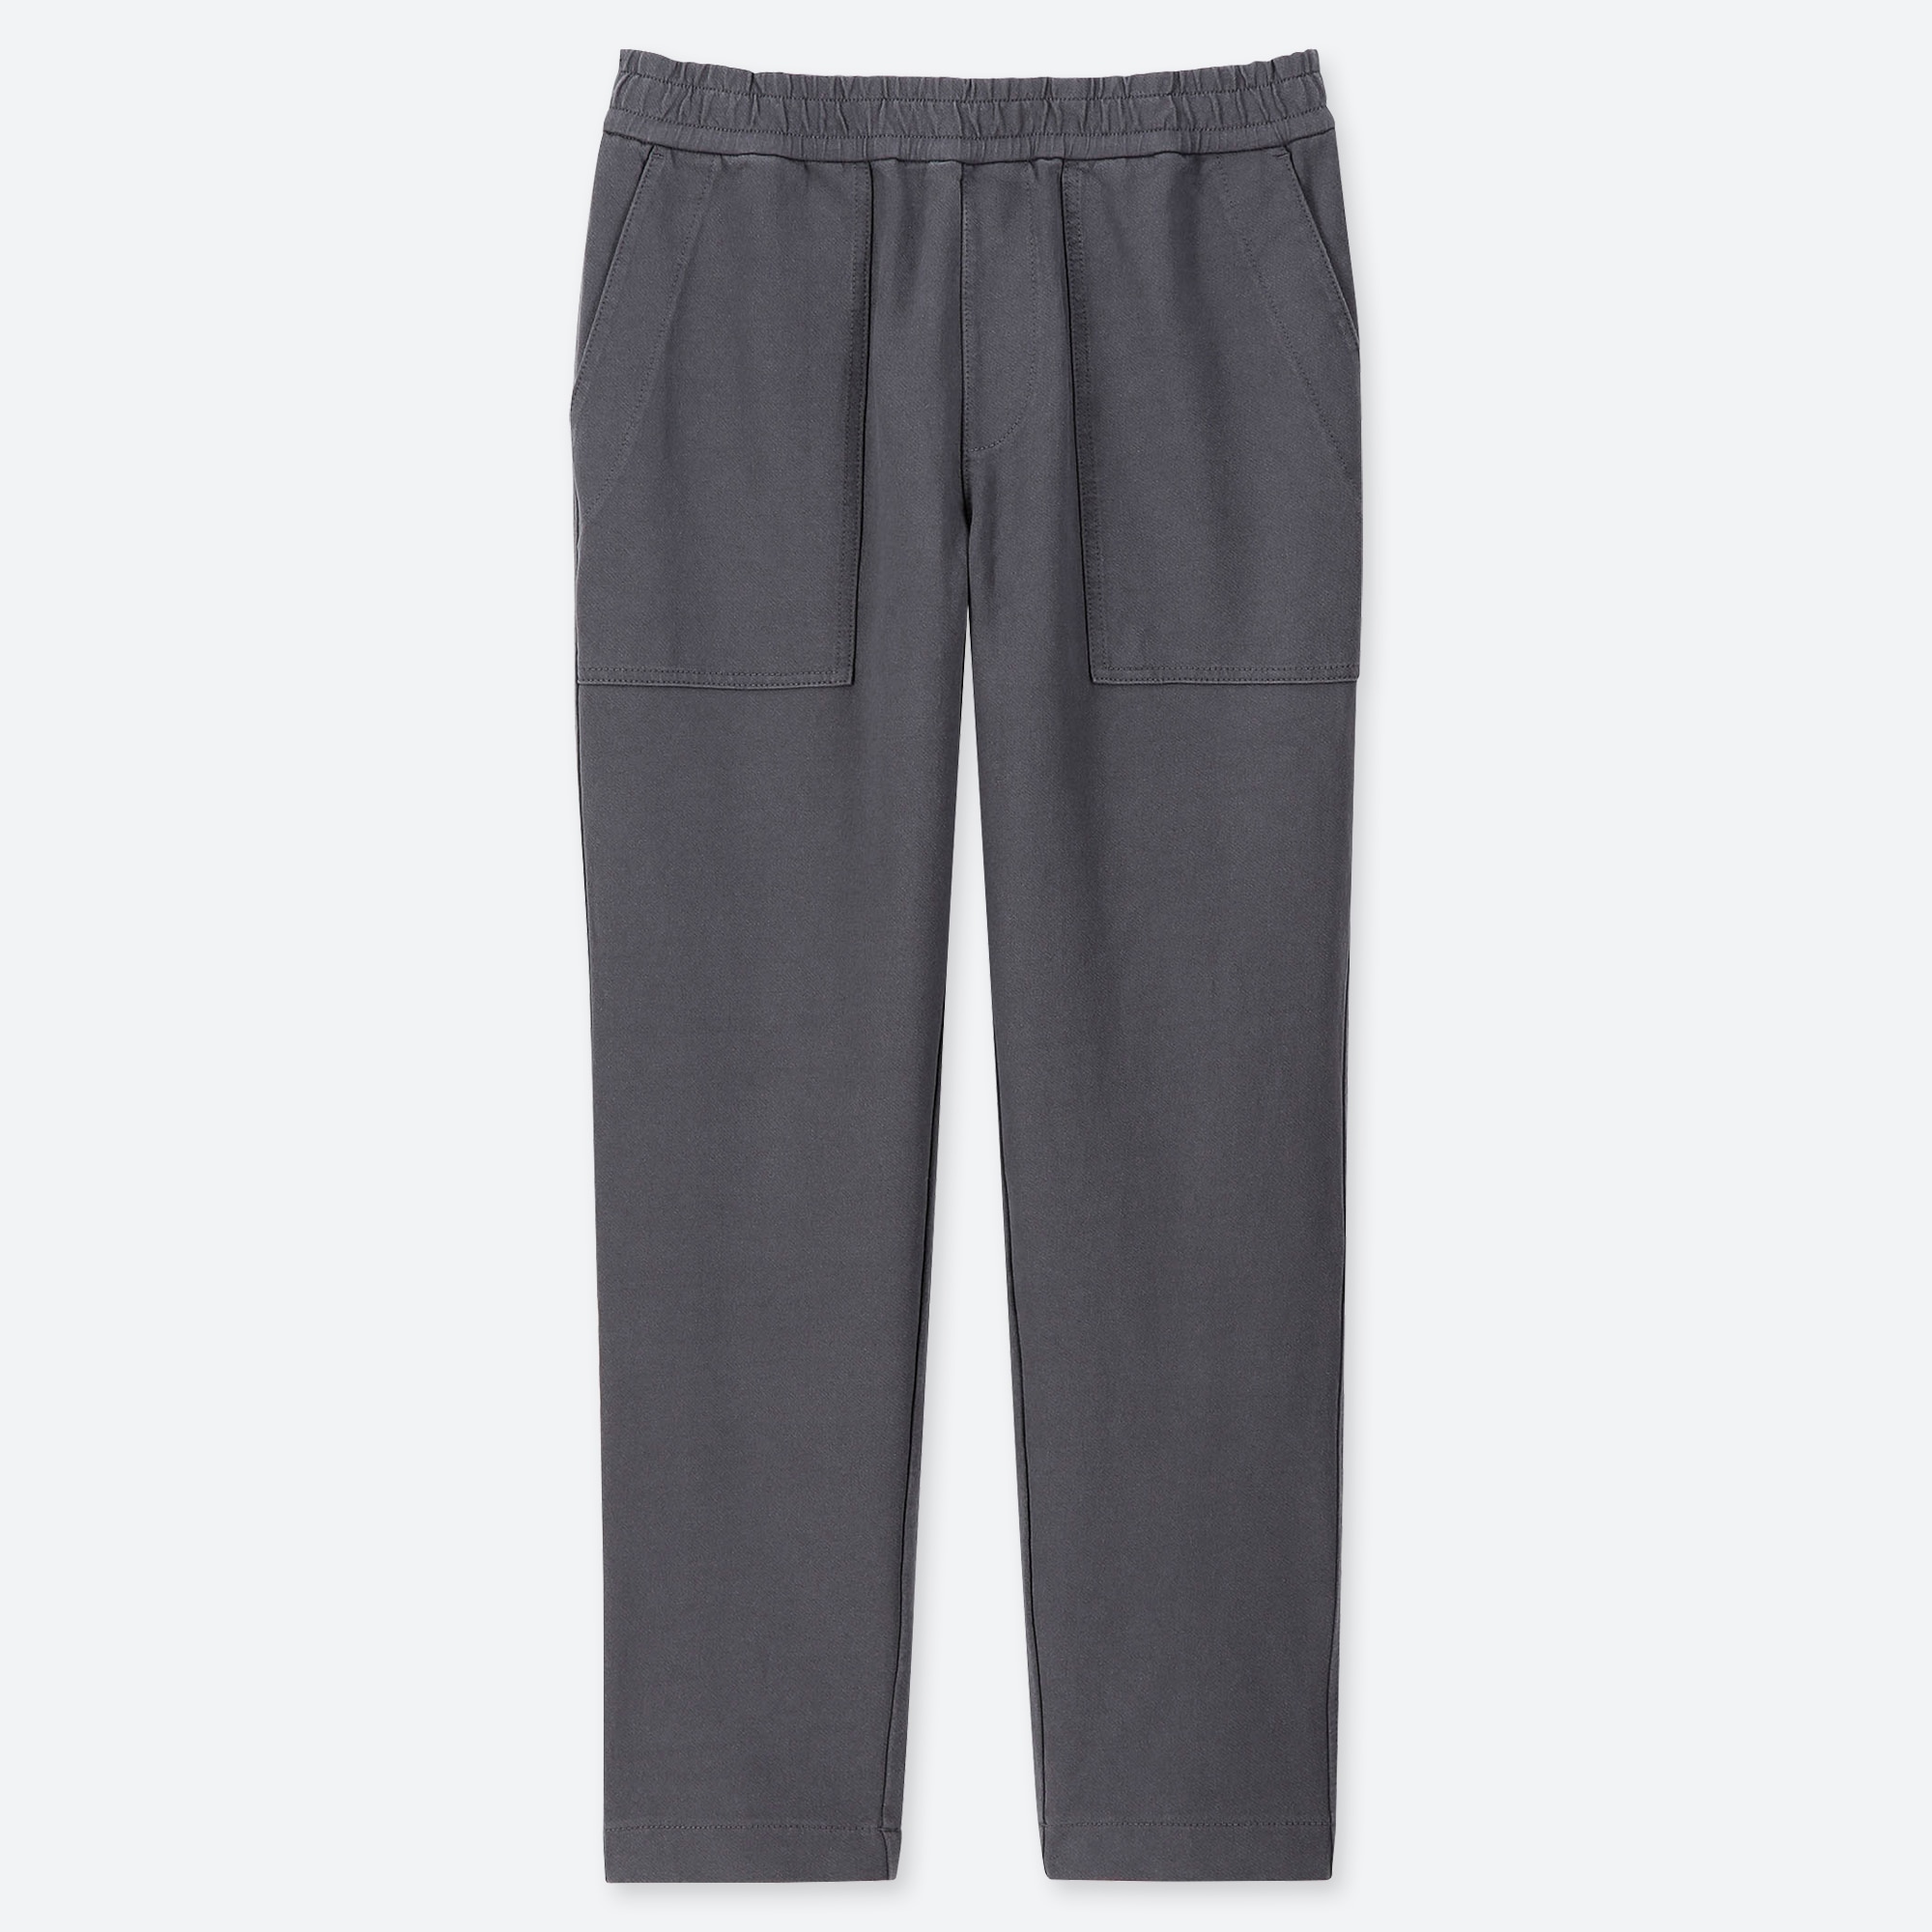 washed jersey ankle length pants